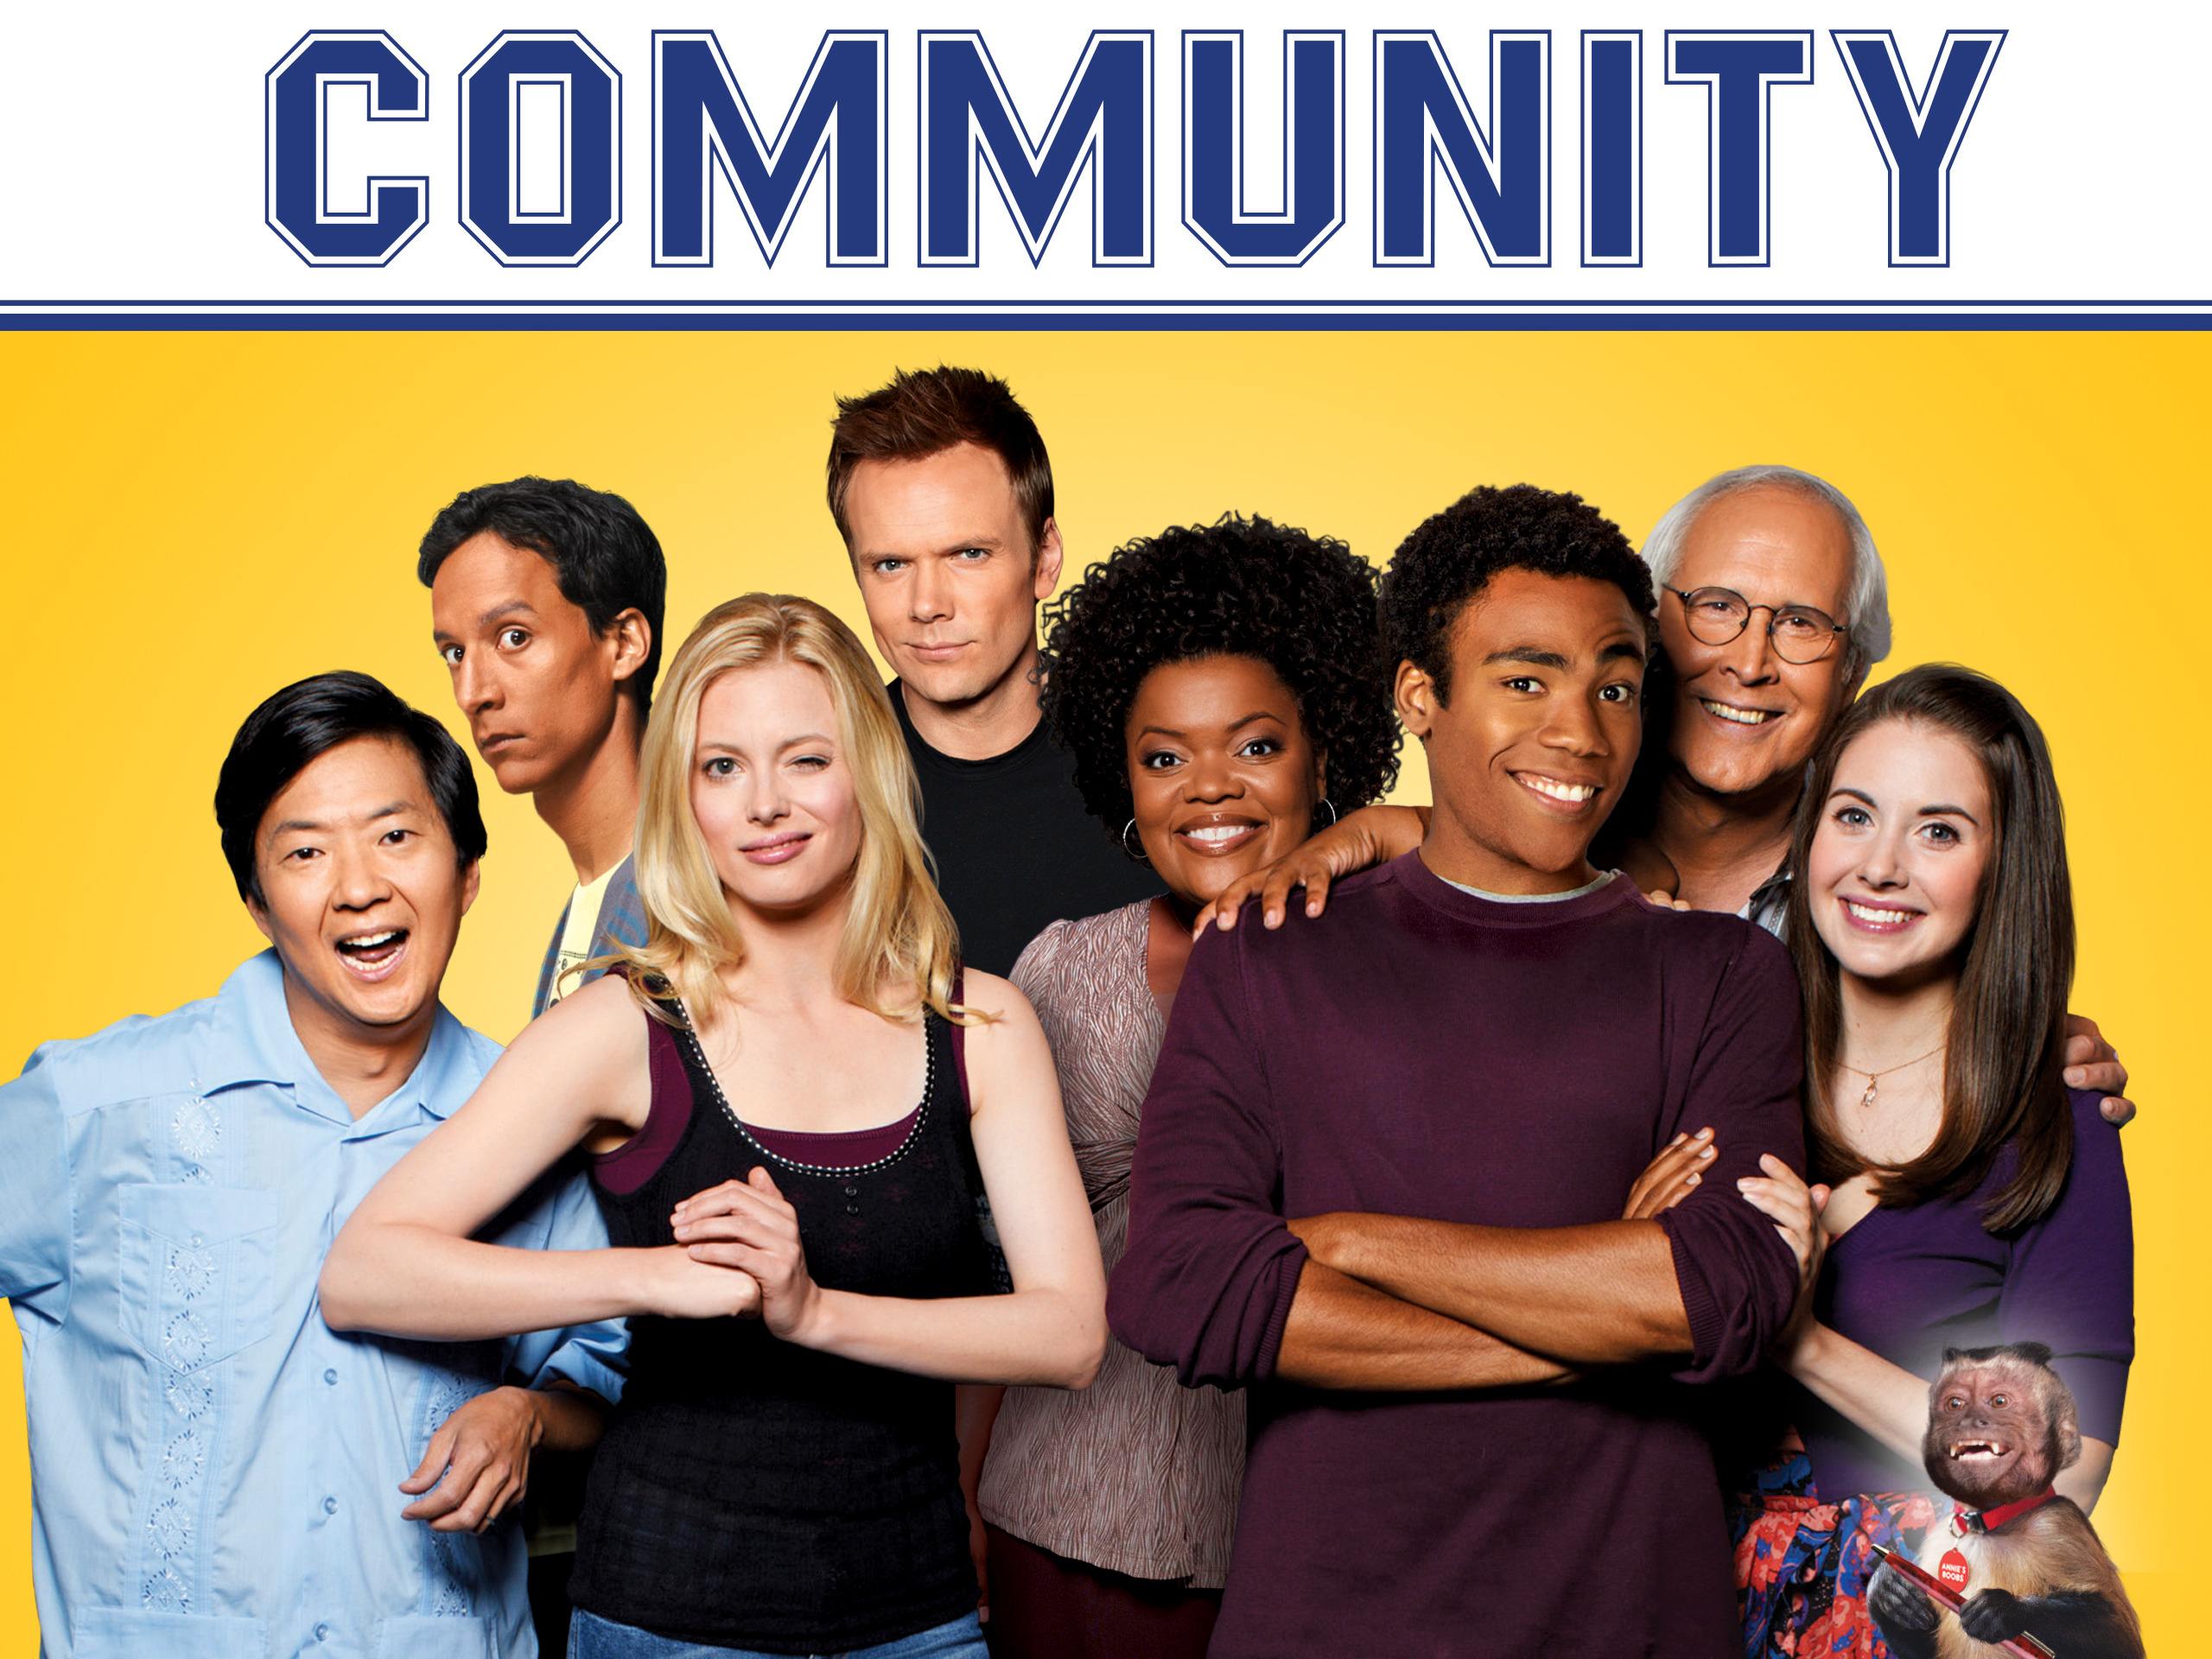 The ‘Community’ Cast is Reuniting for a Virtual Table Read Fundraiser